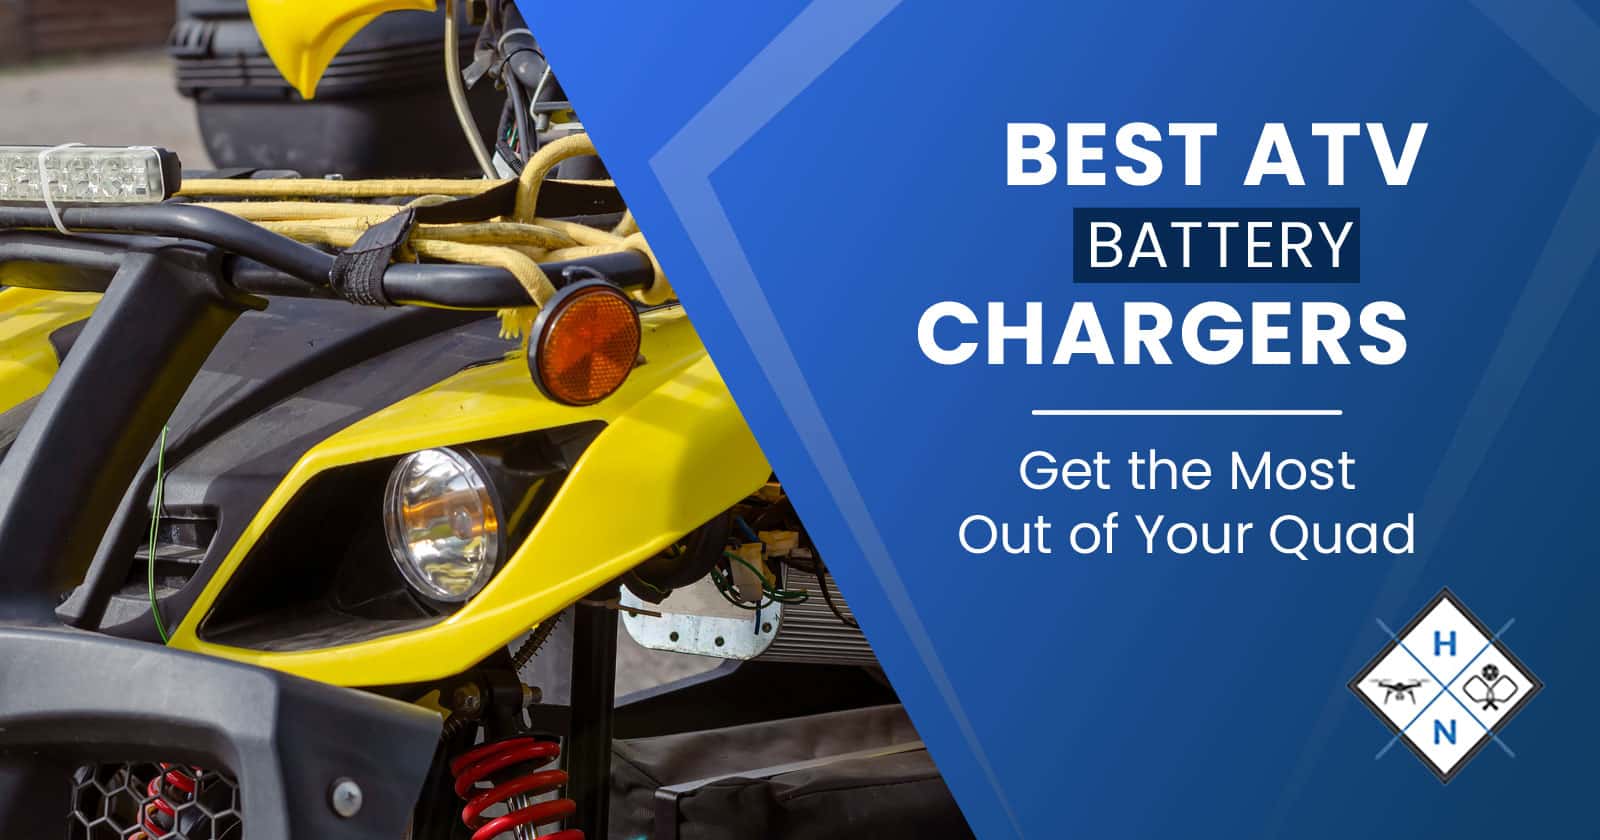 Best ATV Battery Chargers  – Get the Most Our of Your Quad